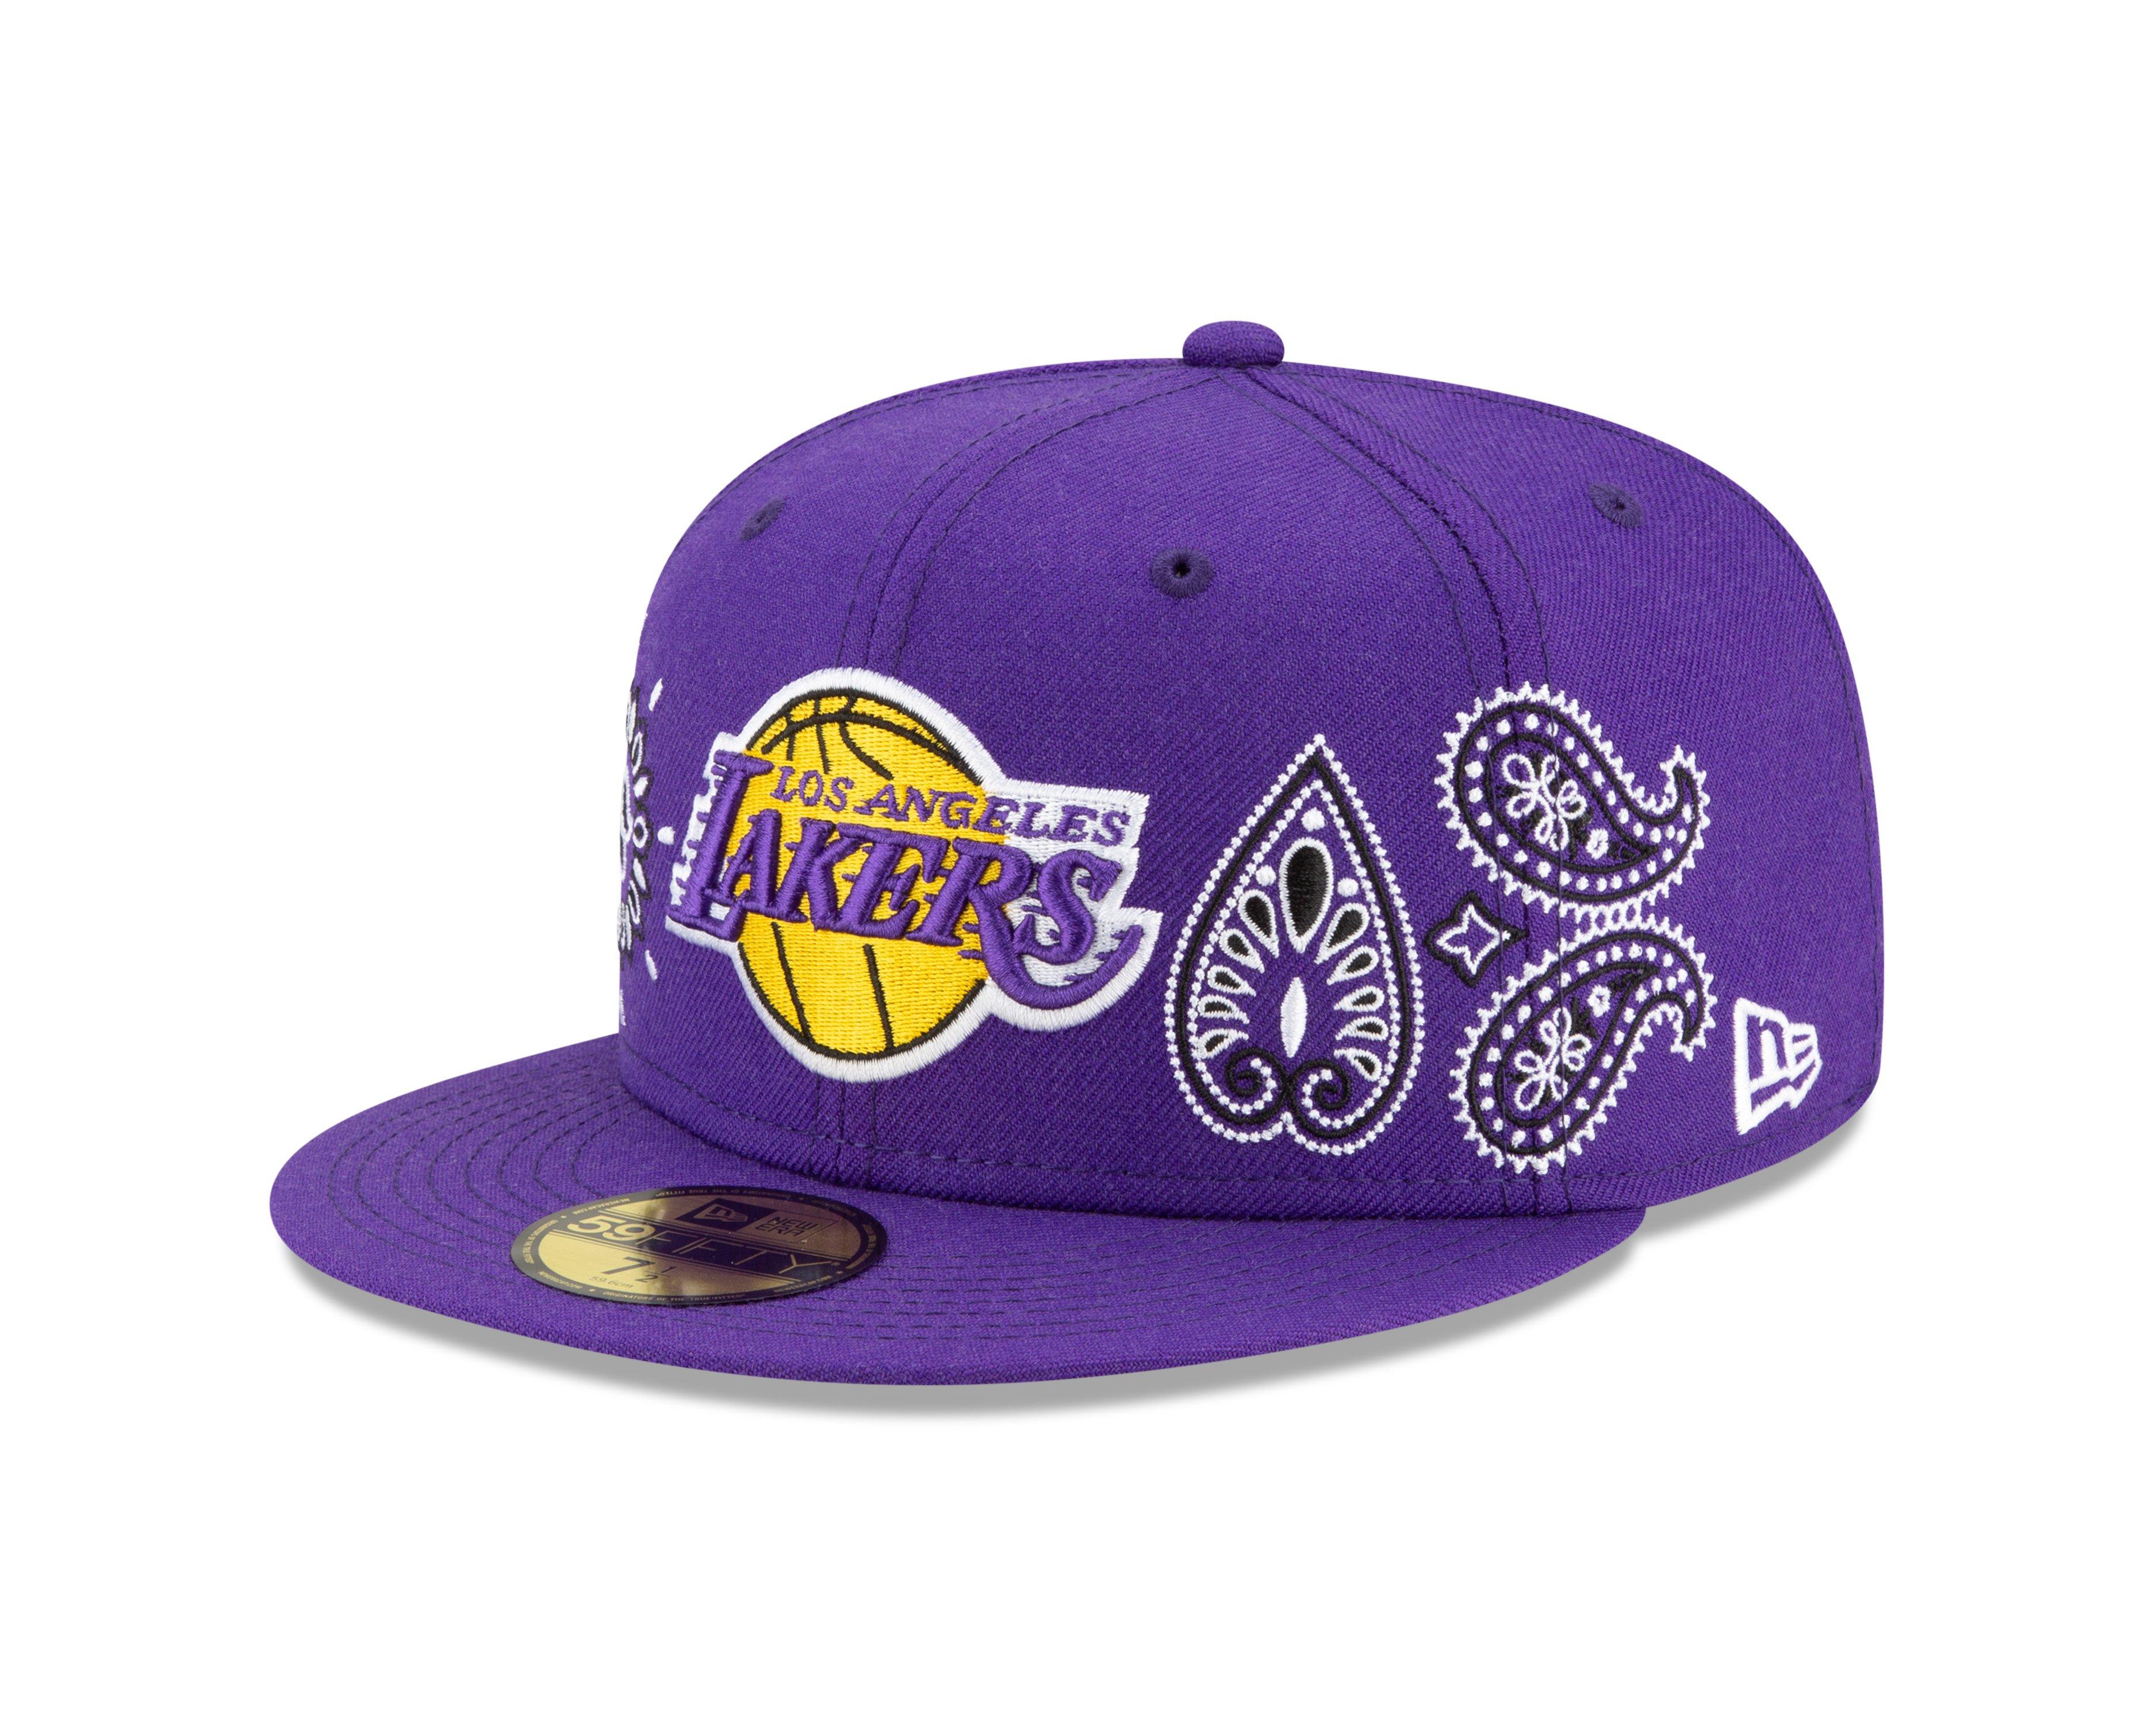 Los Angeles Lakers New Era Youth Official Team Color 59FIFTY Fitted Hat -  Purple